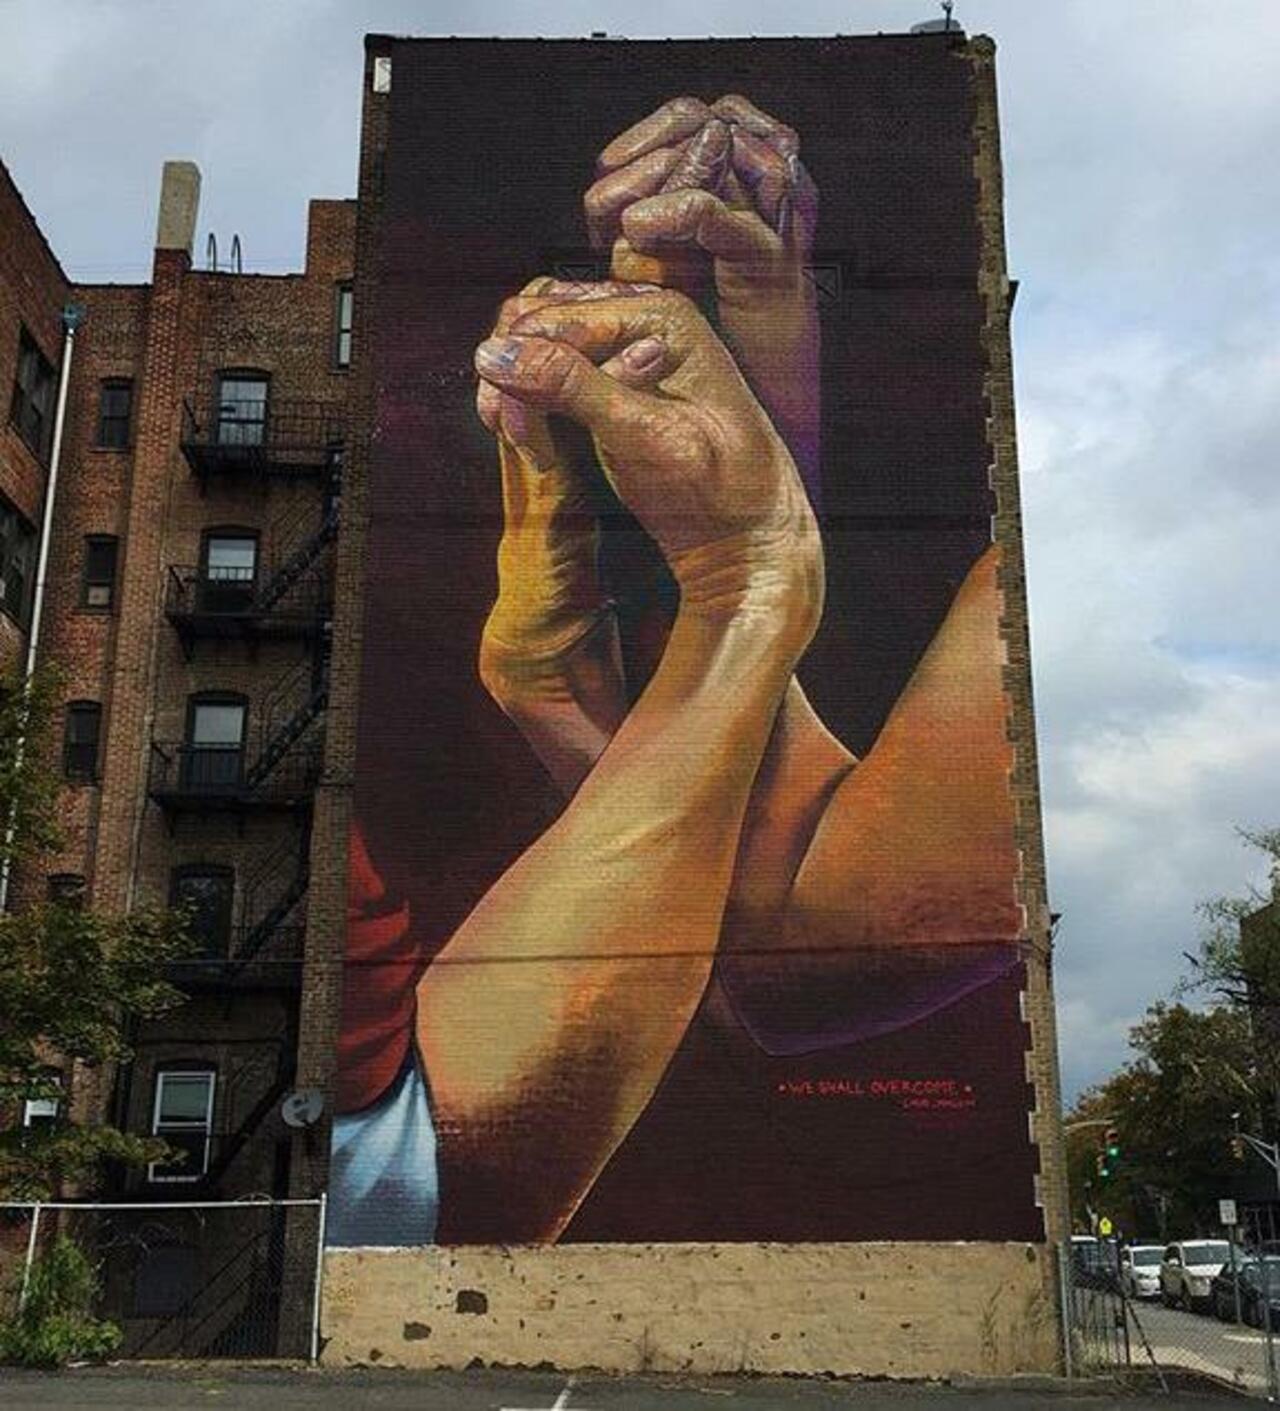 New Street Art by CaseMaclaim in Jersey City for the TheBKcollective 

#art #graffiti #mural #streetart http://t.co/VpPj8RMHfd